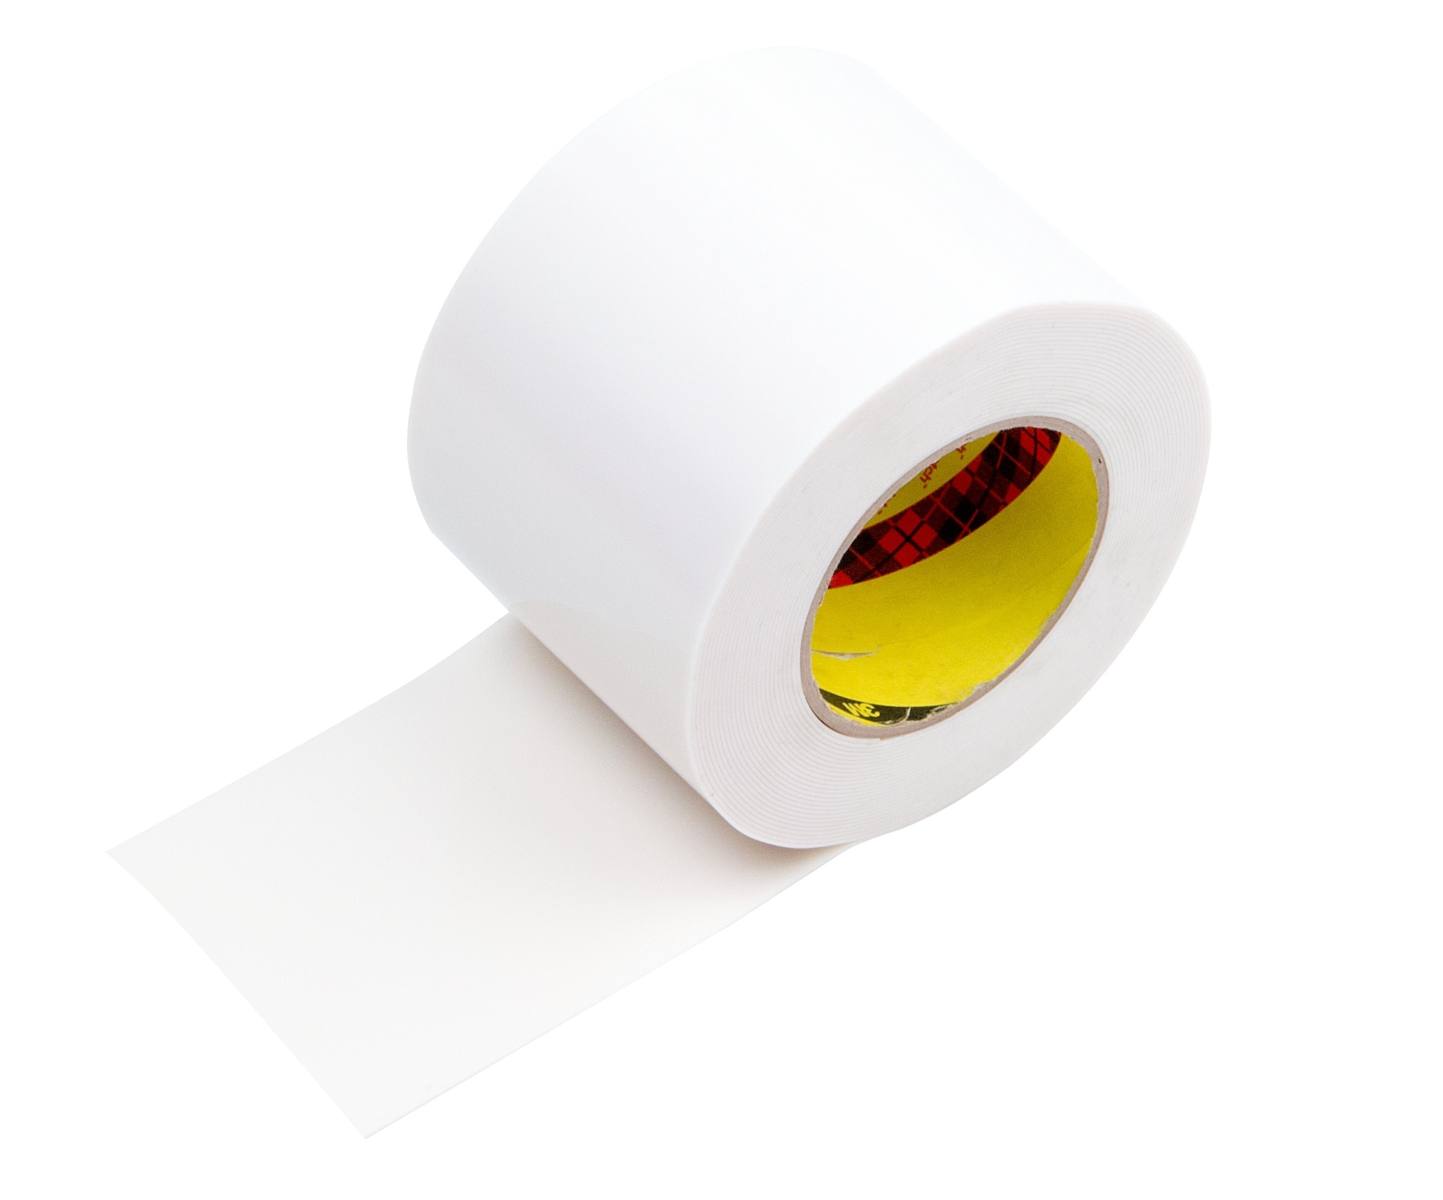 3M Thermally conductive adhesive film 8926-025 600 mm x 40 m, 0.250 mm